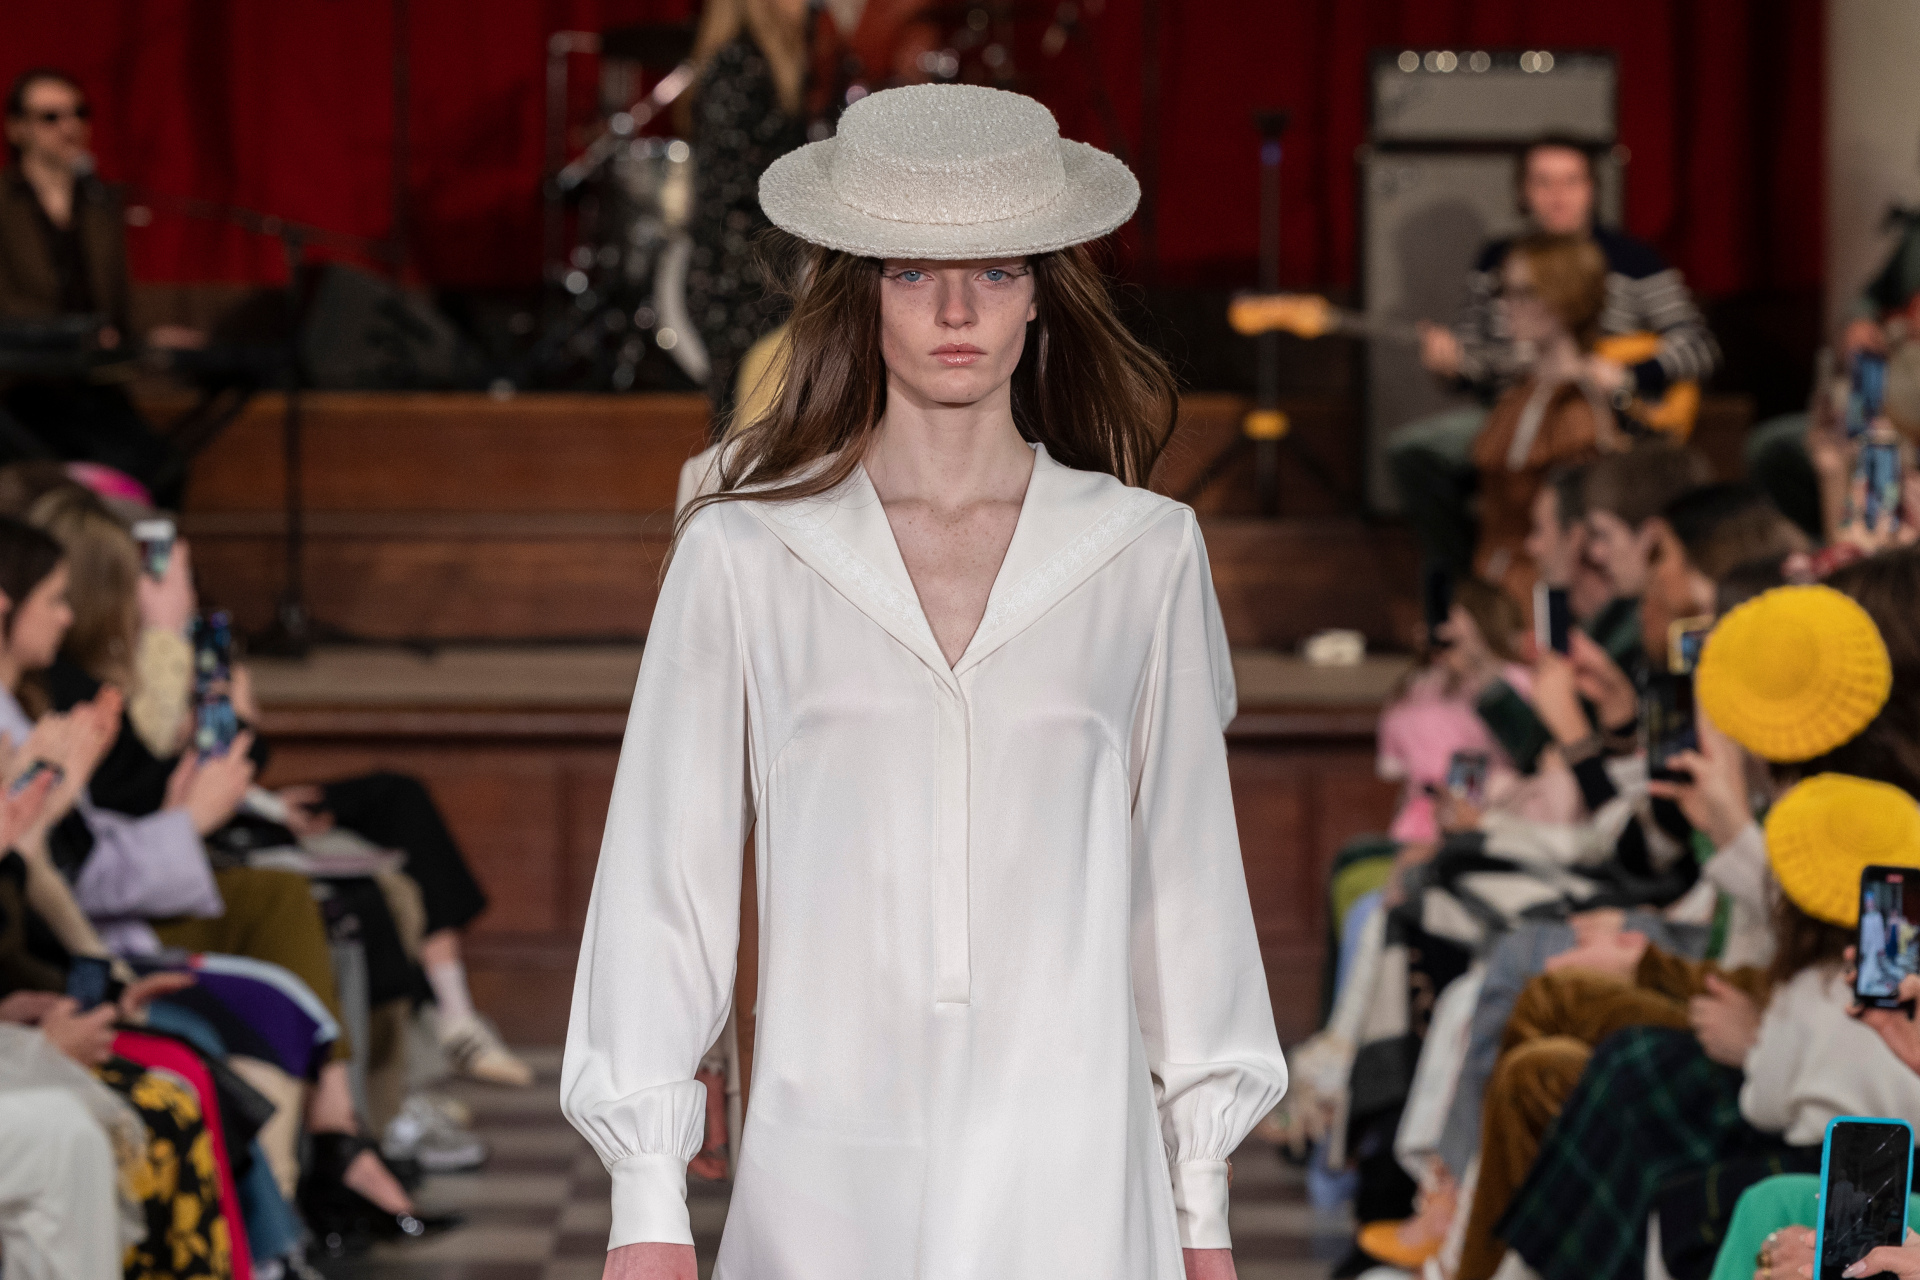 Woman in white dress and hat walking the runway